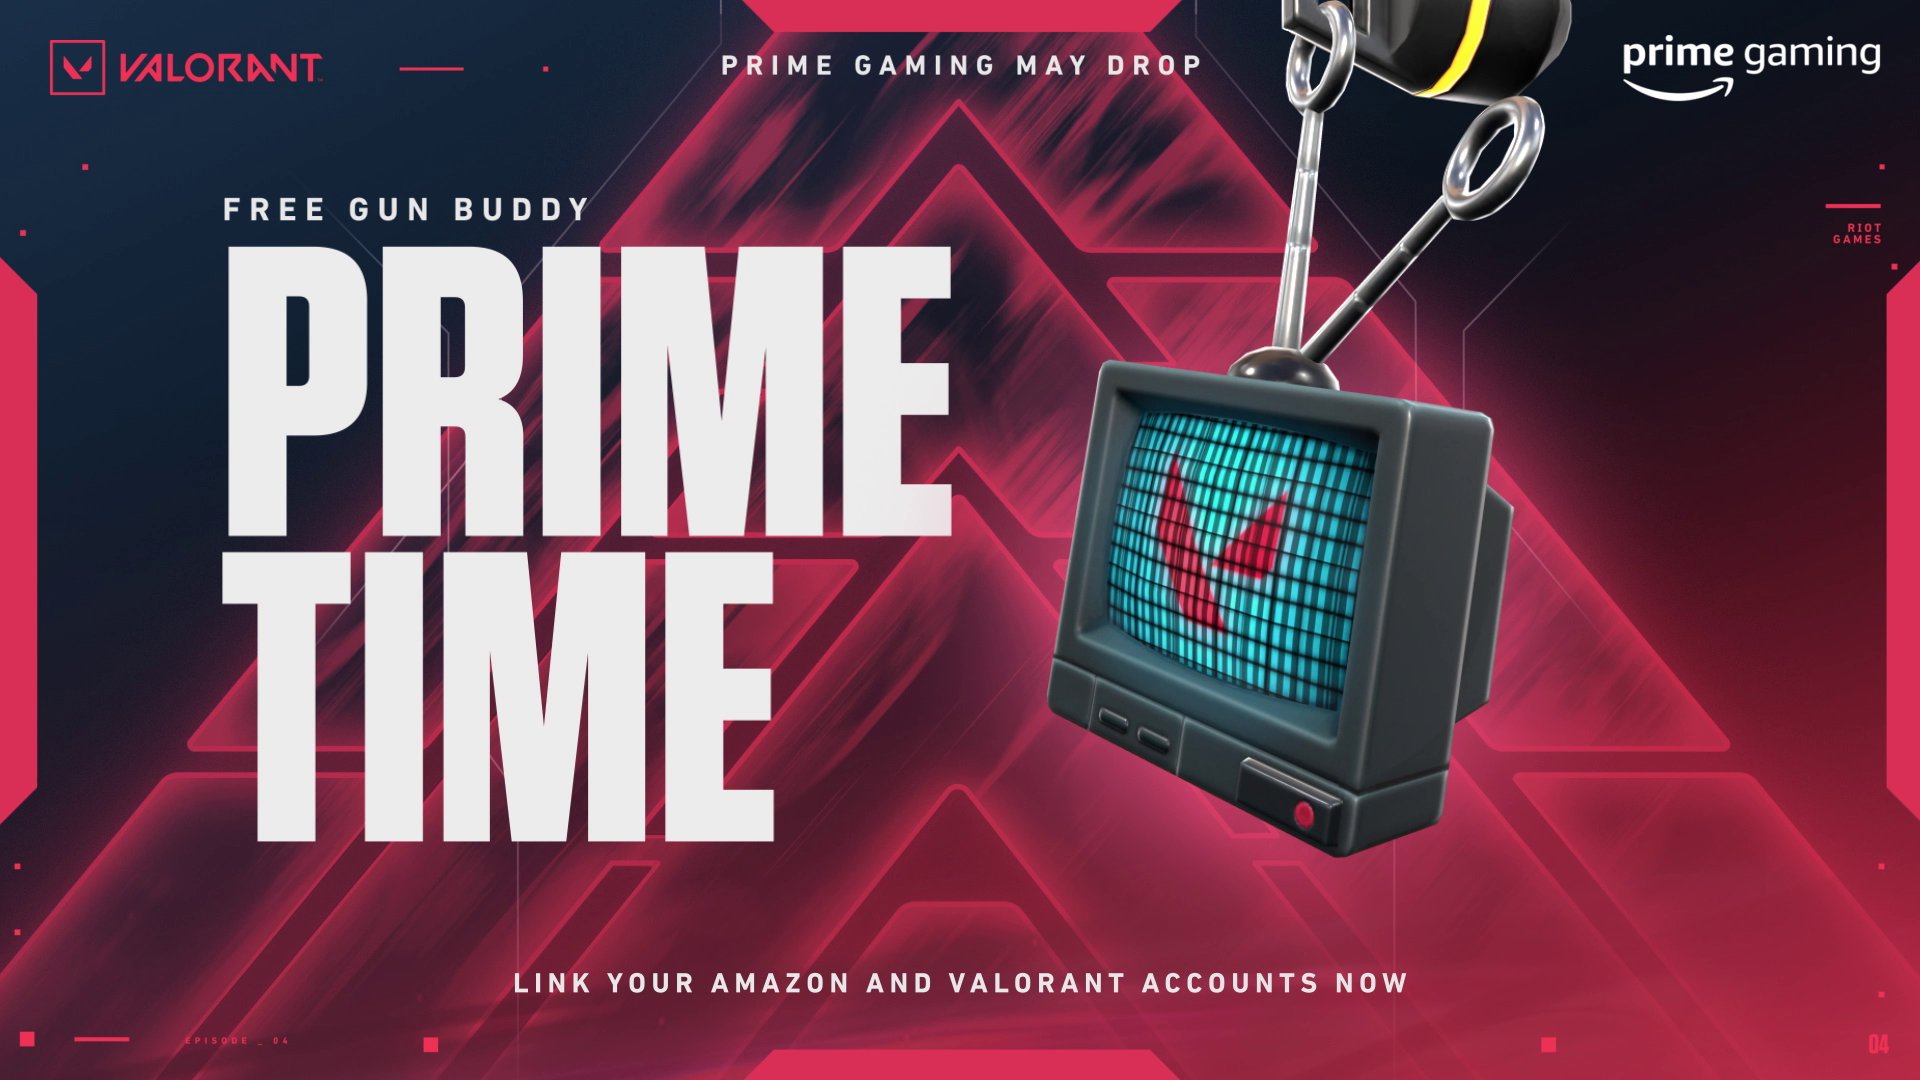 Dance of Luck Buddy: How to Claim the latest Valorant Prime Gaming Reward?  - The SportsRush